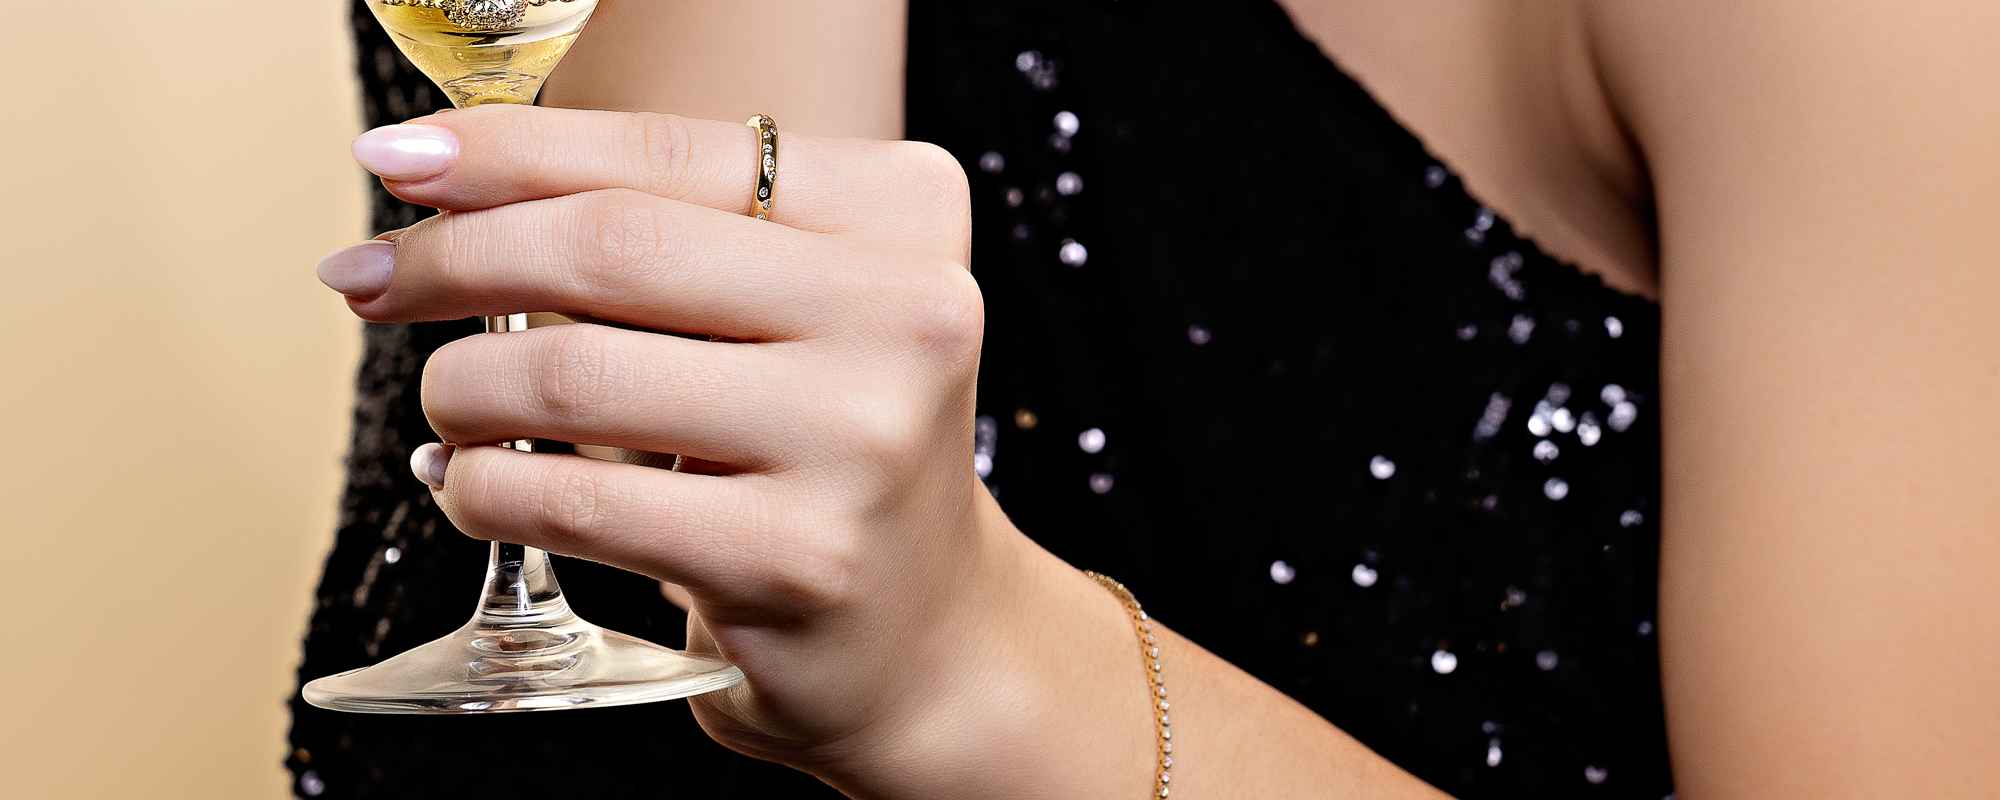 Holiday Proposal: The Romance of Secretly Selecting an Engagement Ring